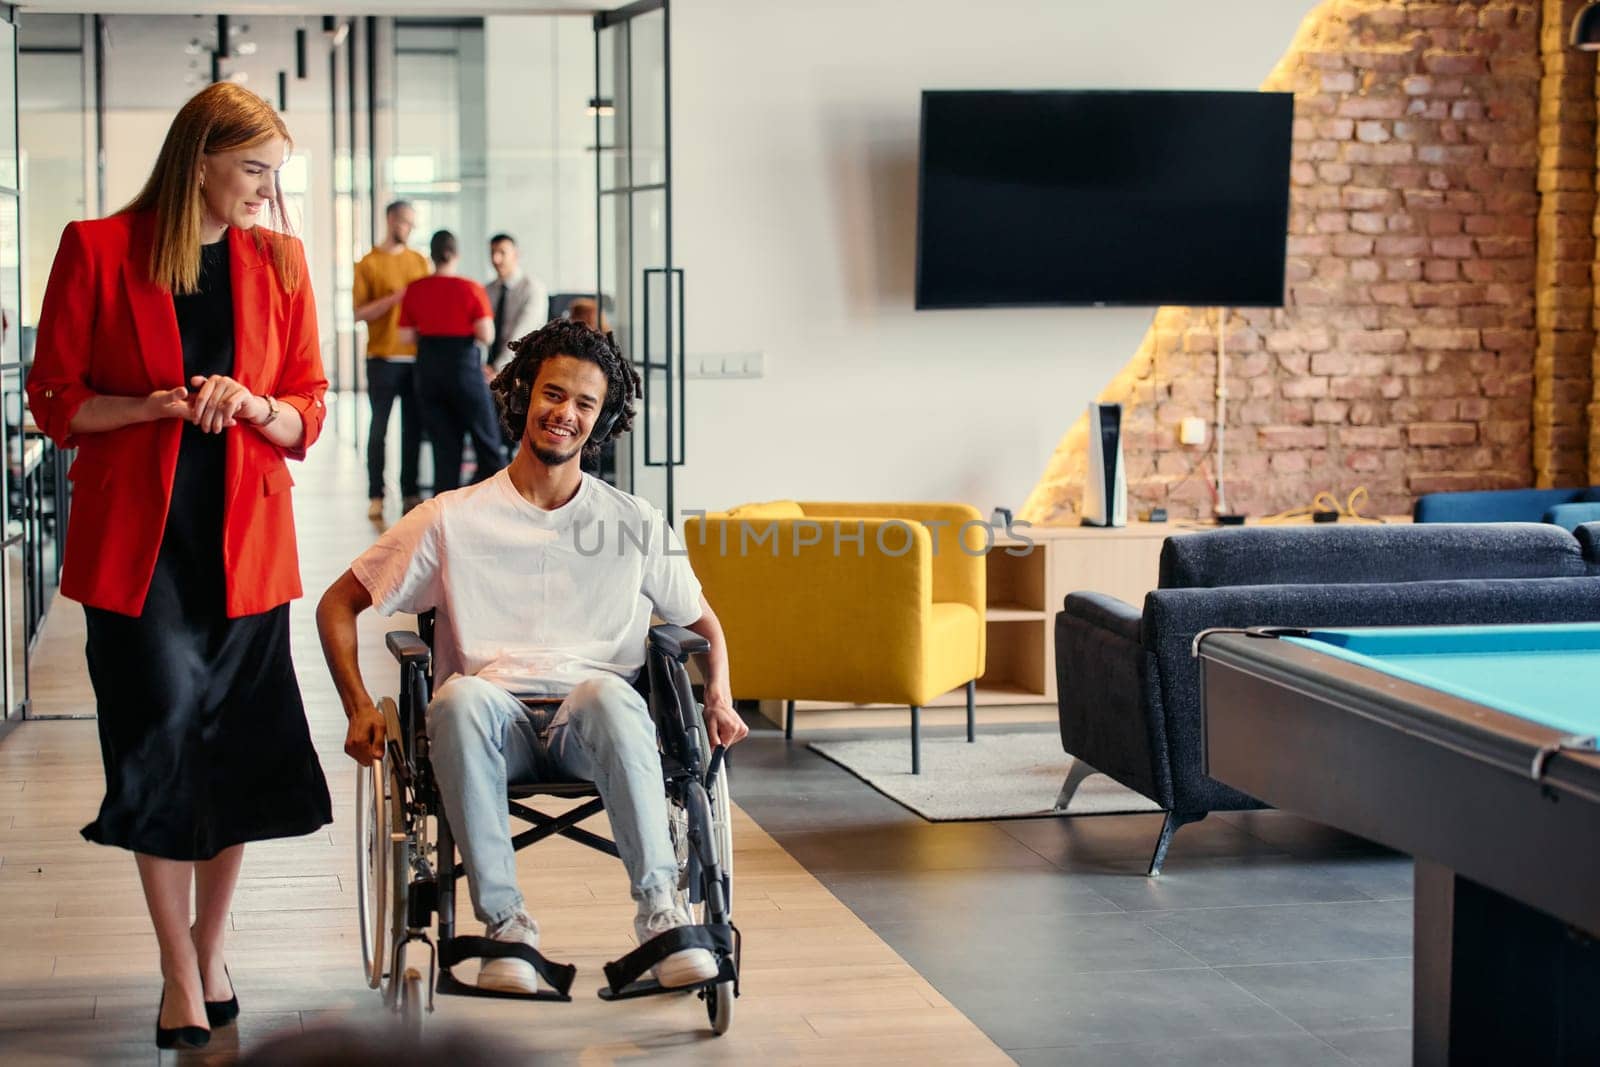 A diverse group of young professionals, including businesswomen and an African-American entrepreneur in a wheelchair, engage in collaborative discussion on various business projects in a modern startup office setting